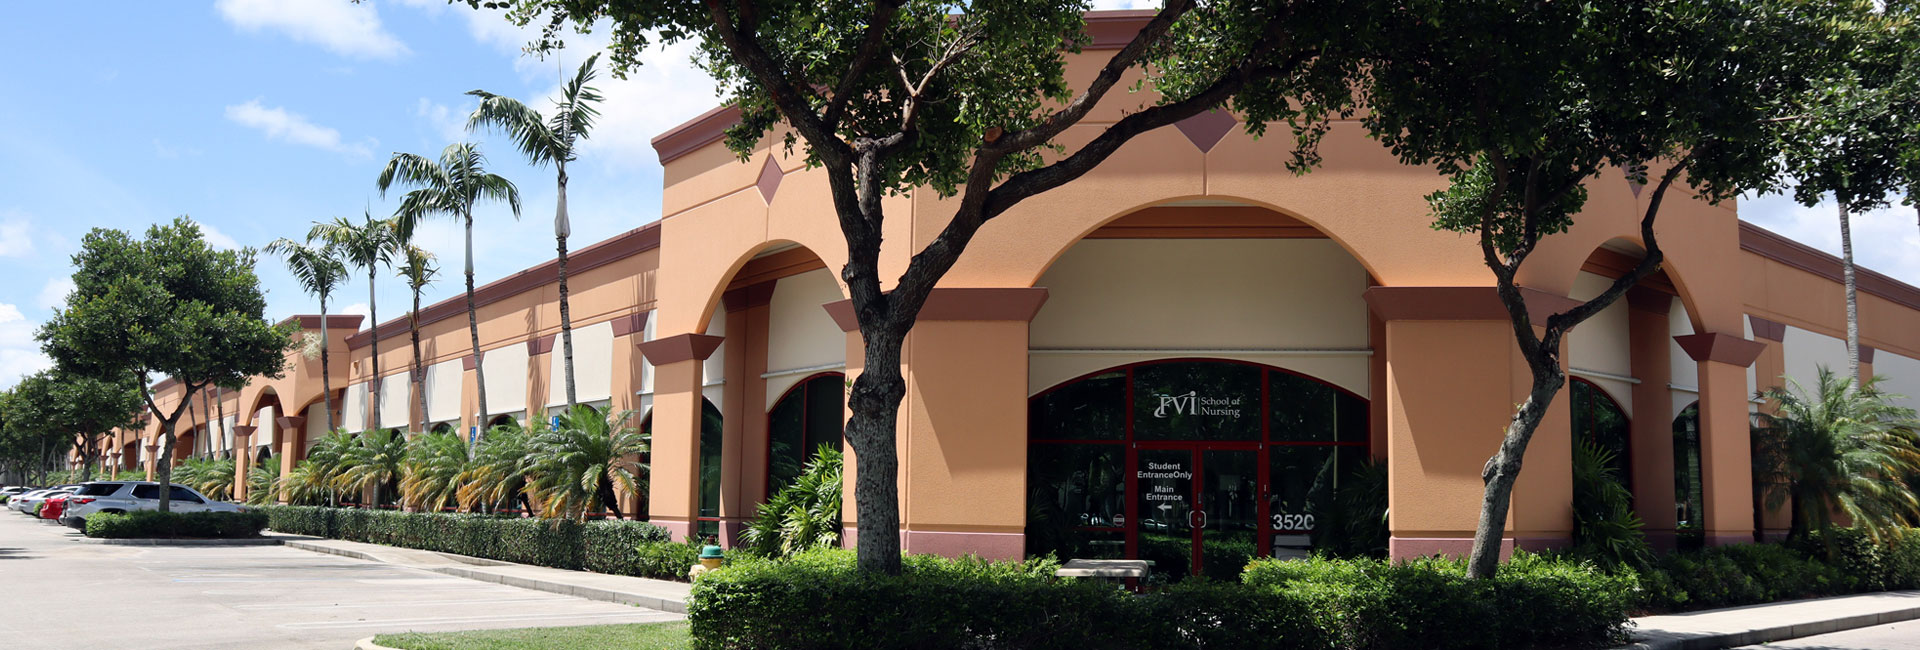 An outside view of the Miramar campus